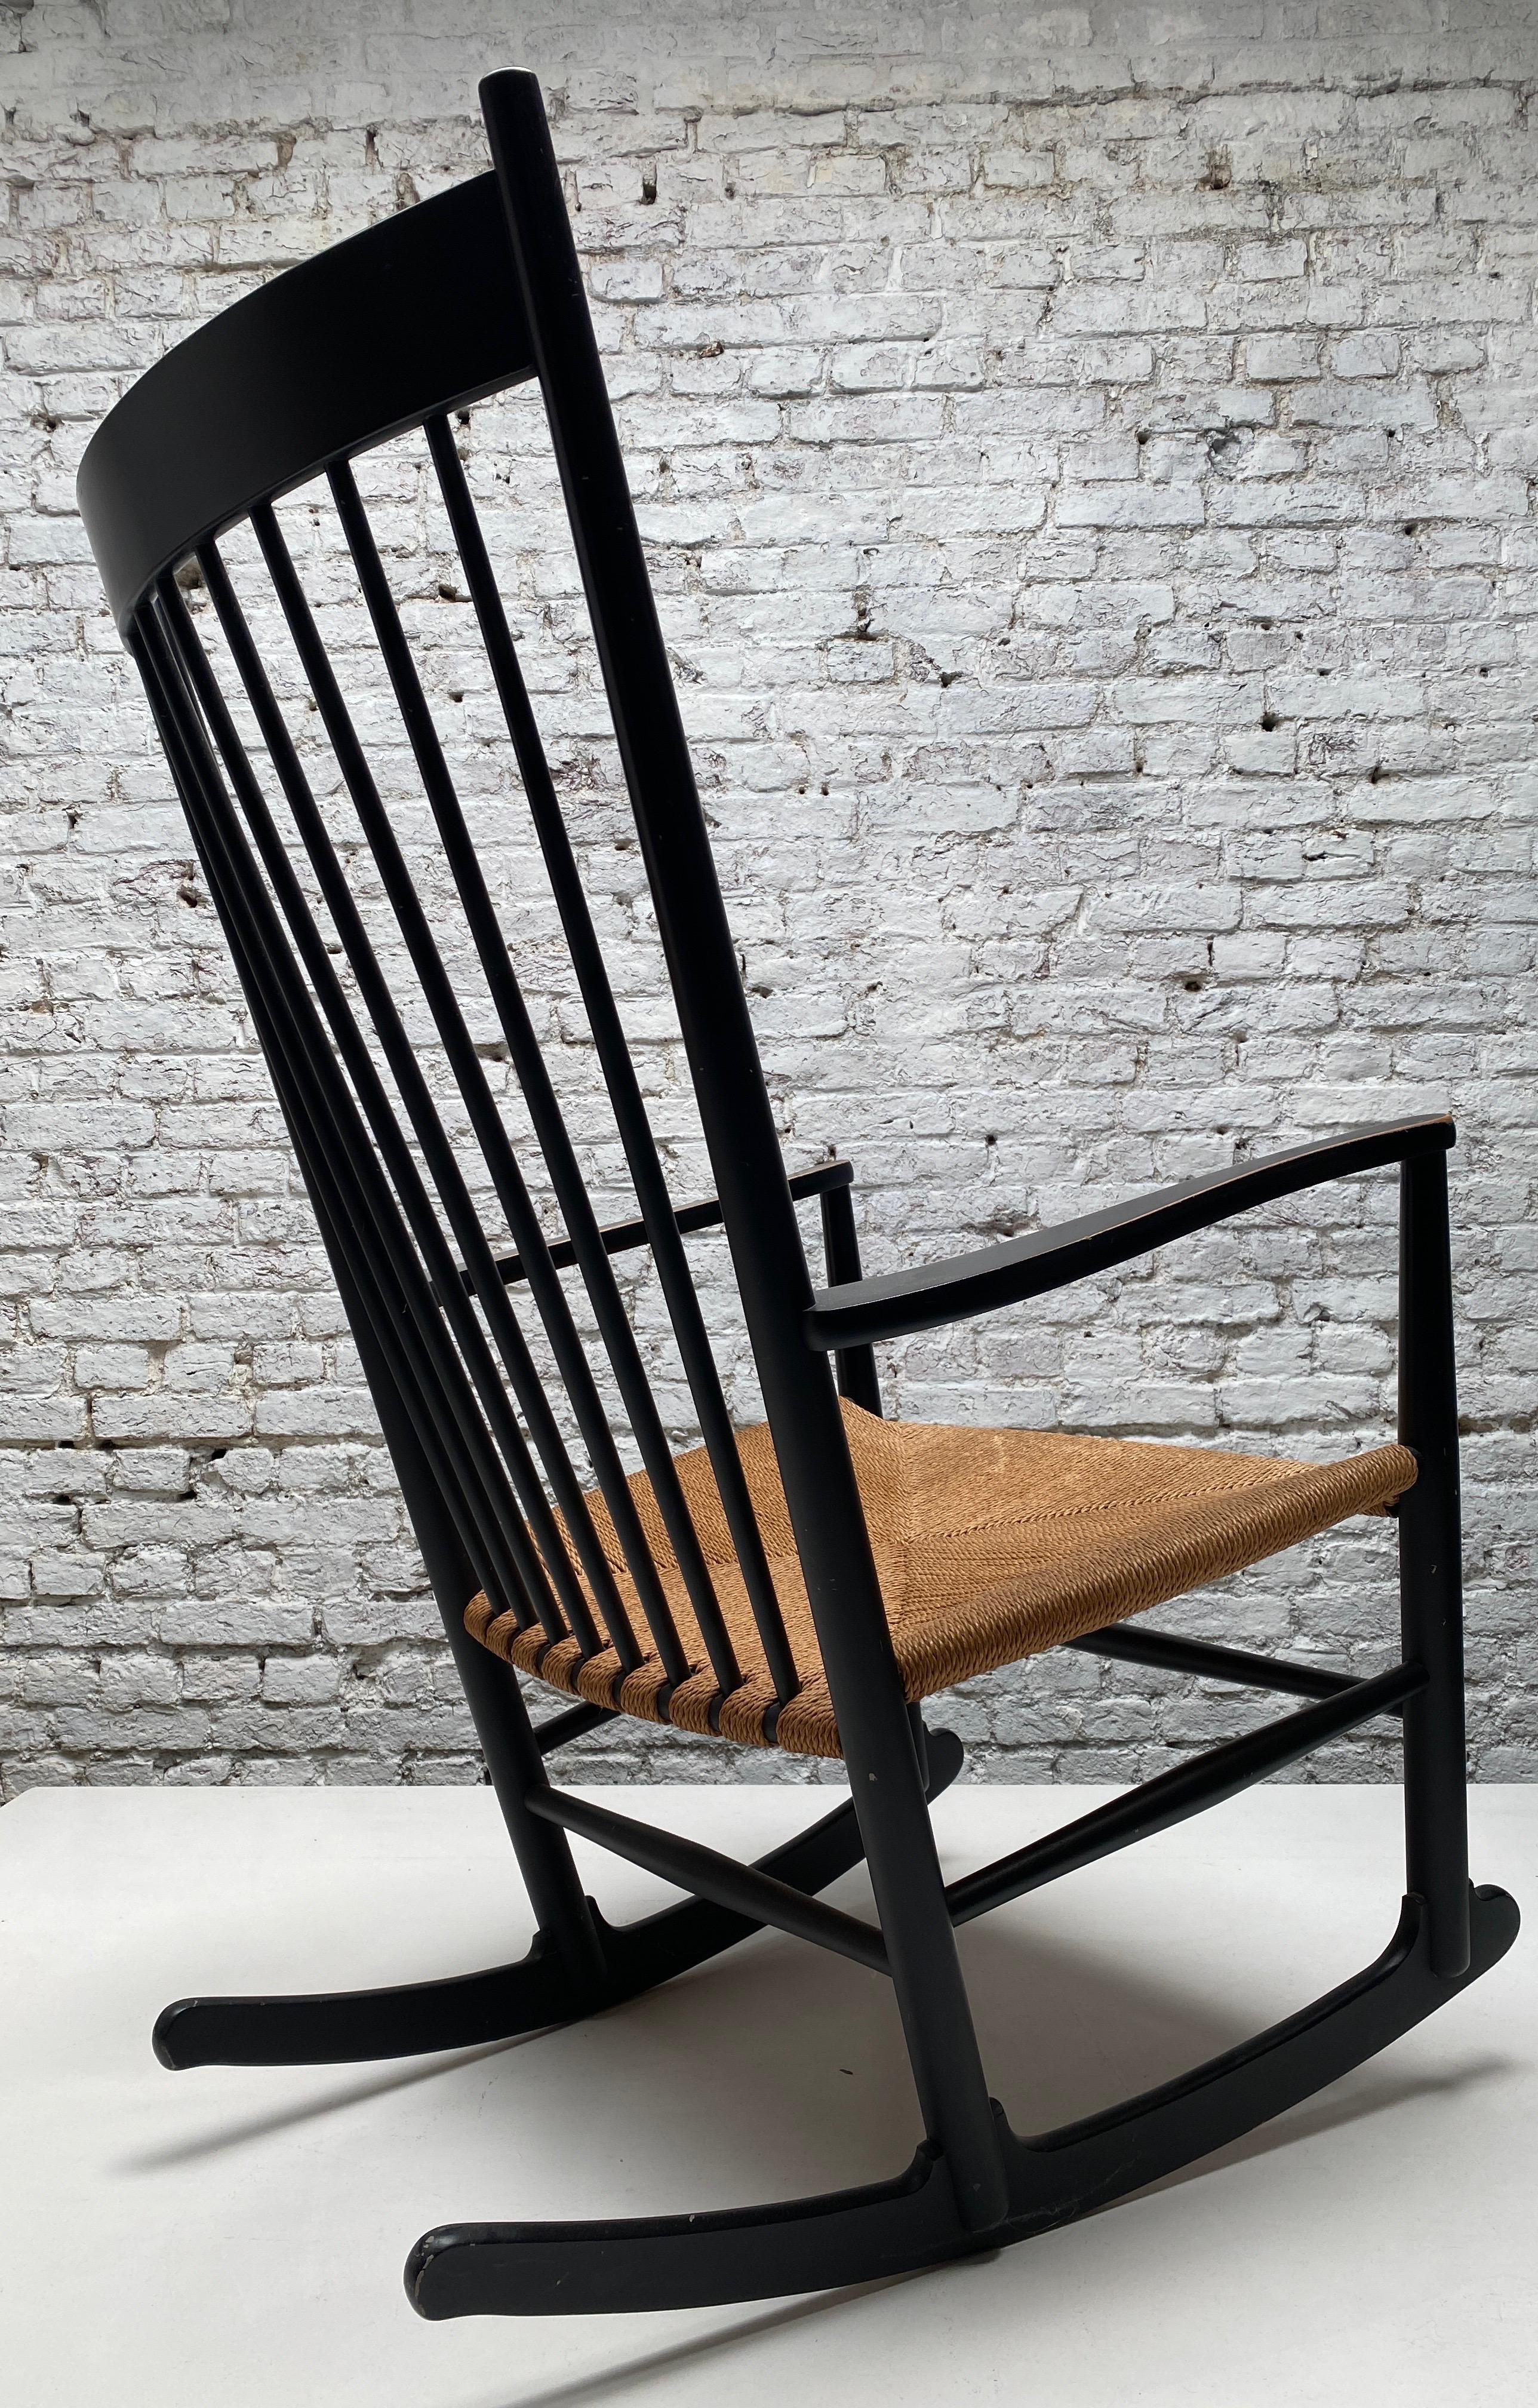 Rocking chair designed by Hans Wegner for FDB Møbler, Denmark 1950’s. This iconic rocking chair Model No.J.16 -has a spindled back, curved armrests in beech and paper-cord seat all in its original finish. Very well presented original condition. Very